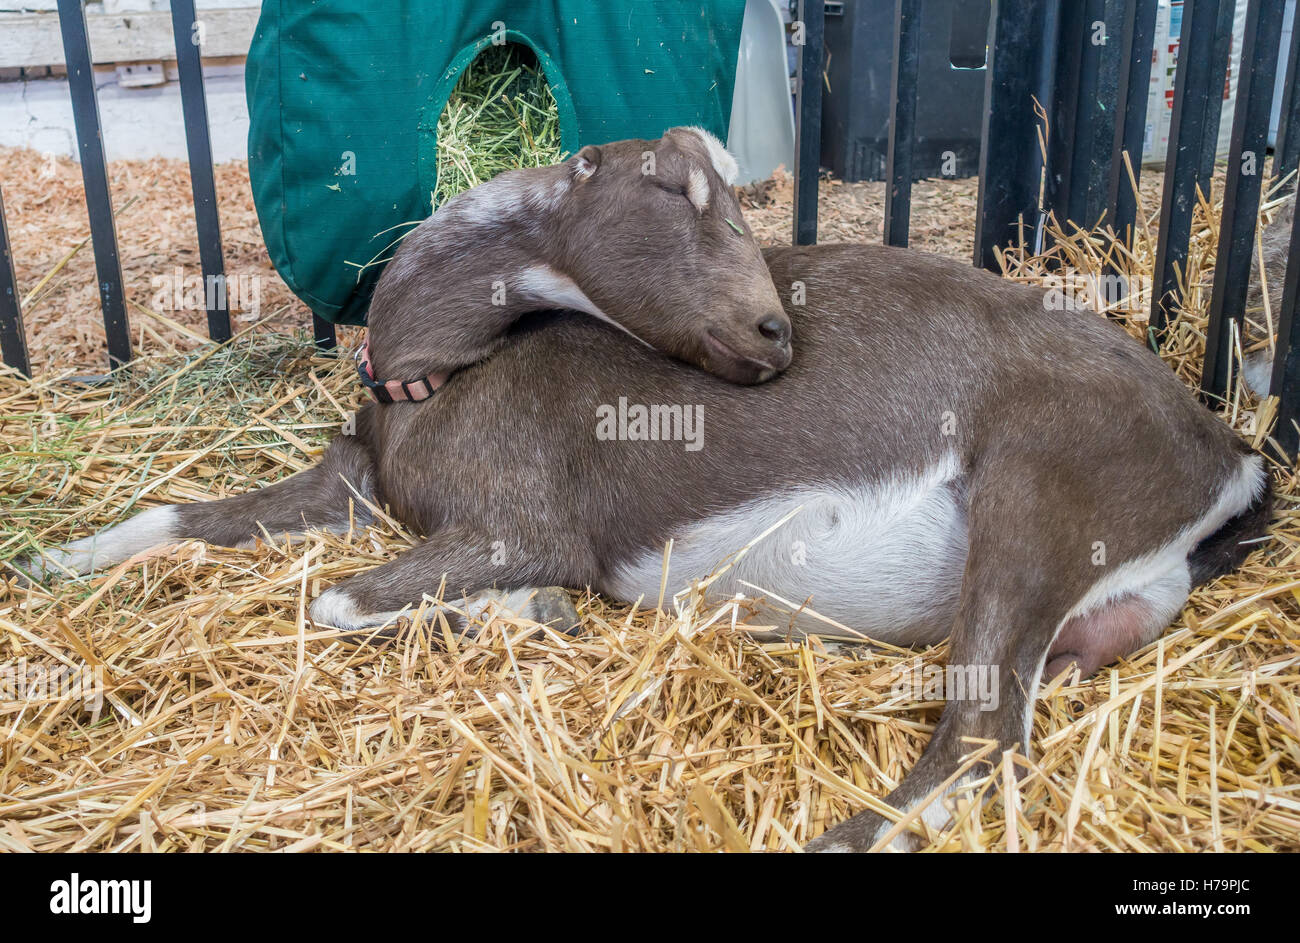 A brown and white mother goat sleeps in a bed of straw. Stock Photo